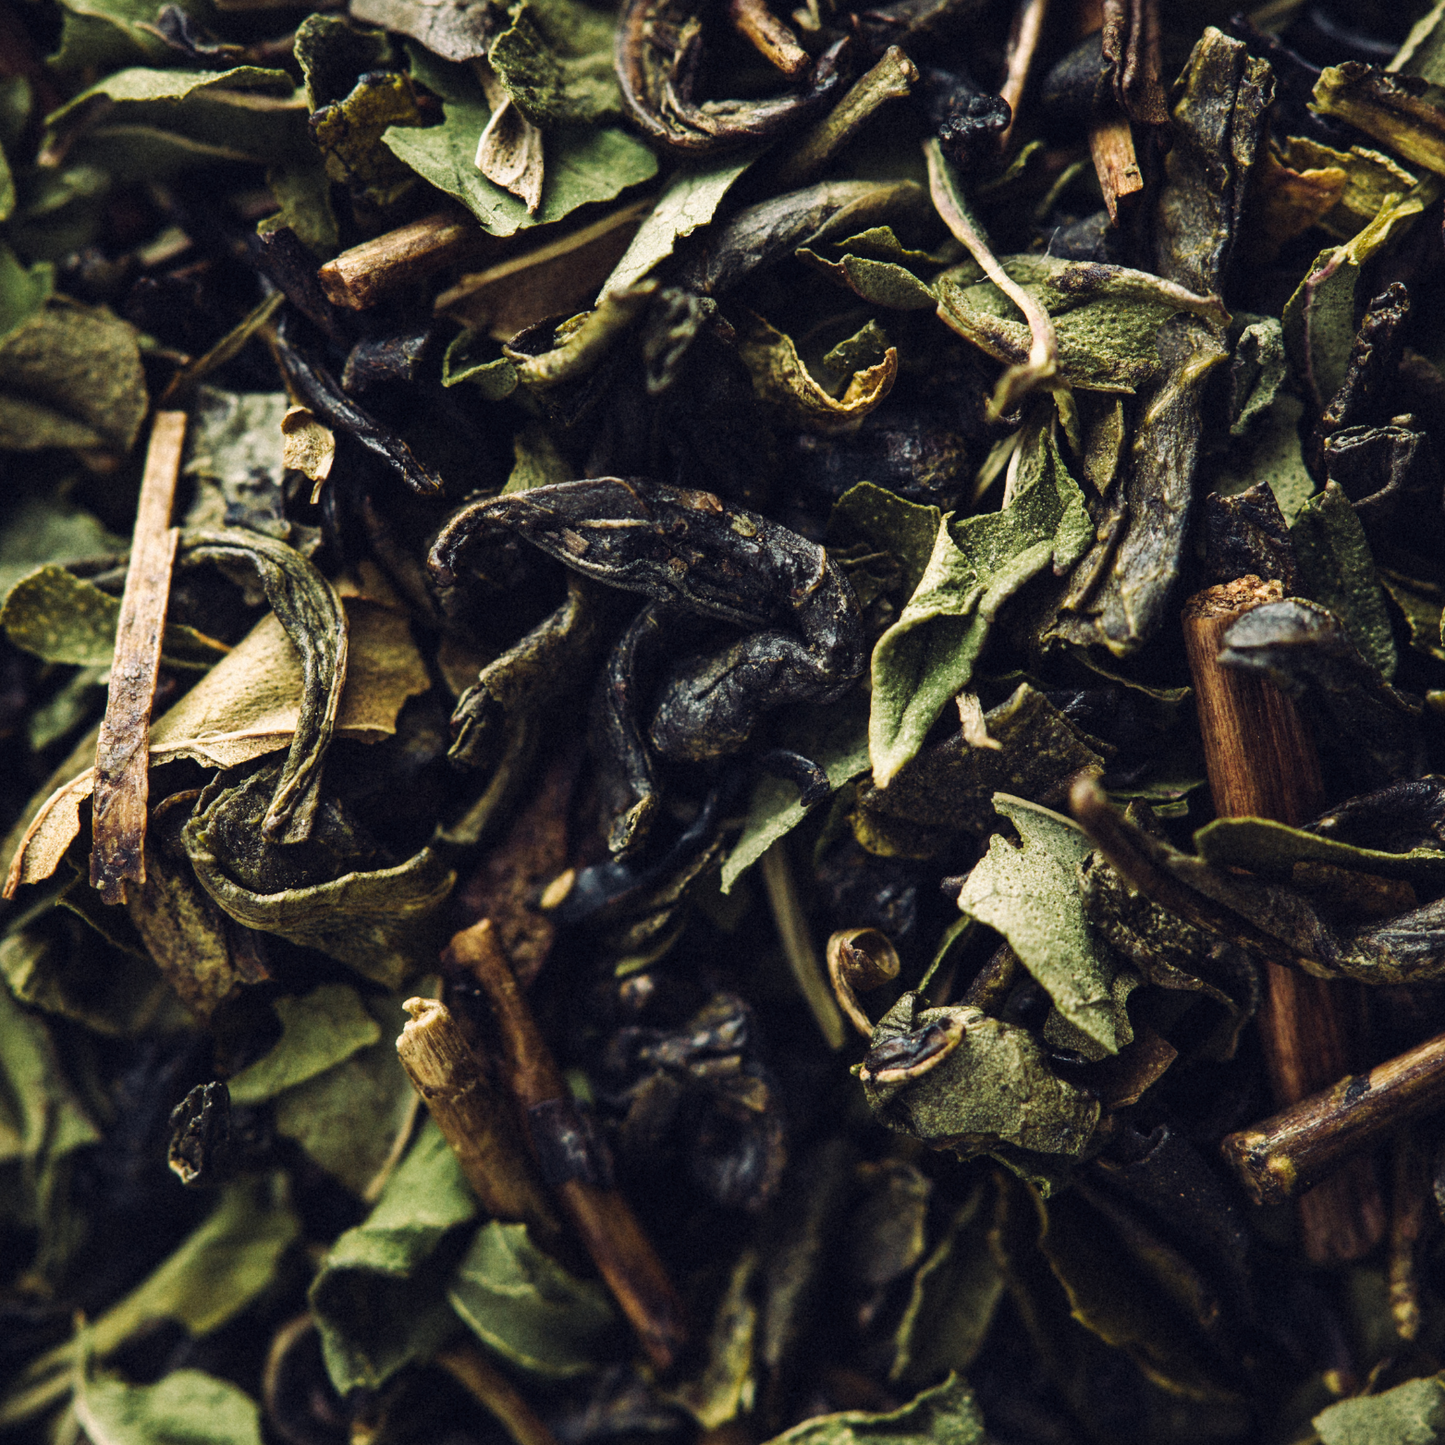 Just Peachy Loose Leaf White Tea, Peach Flavored, Low Caffeine Content